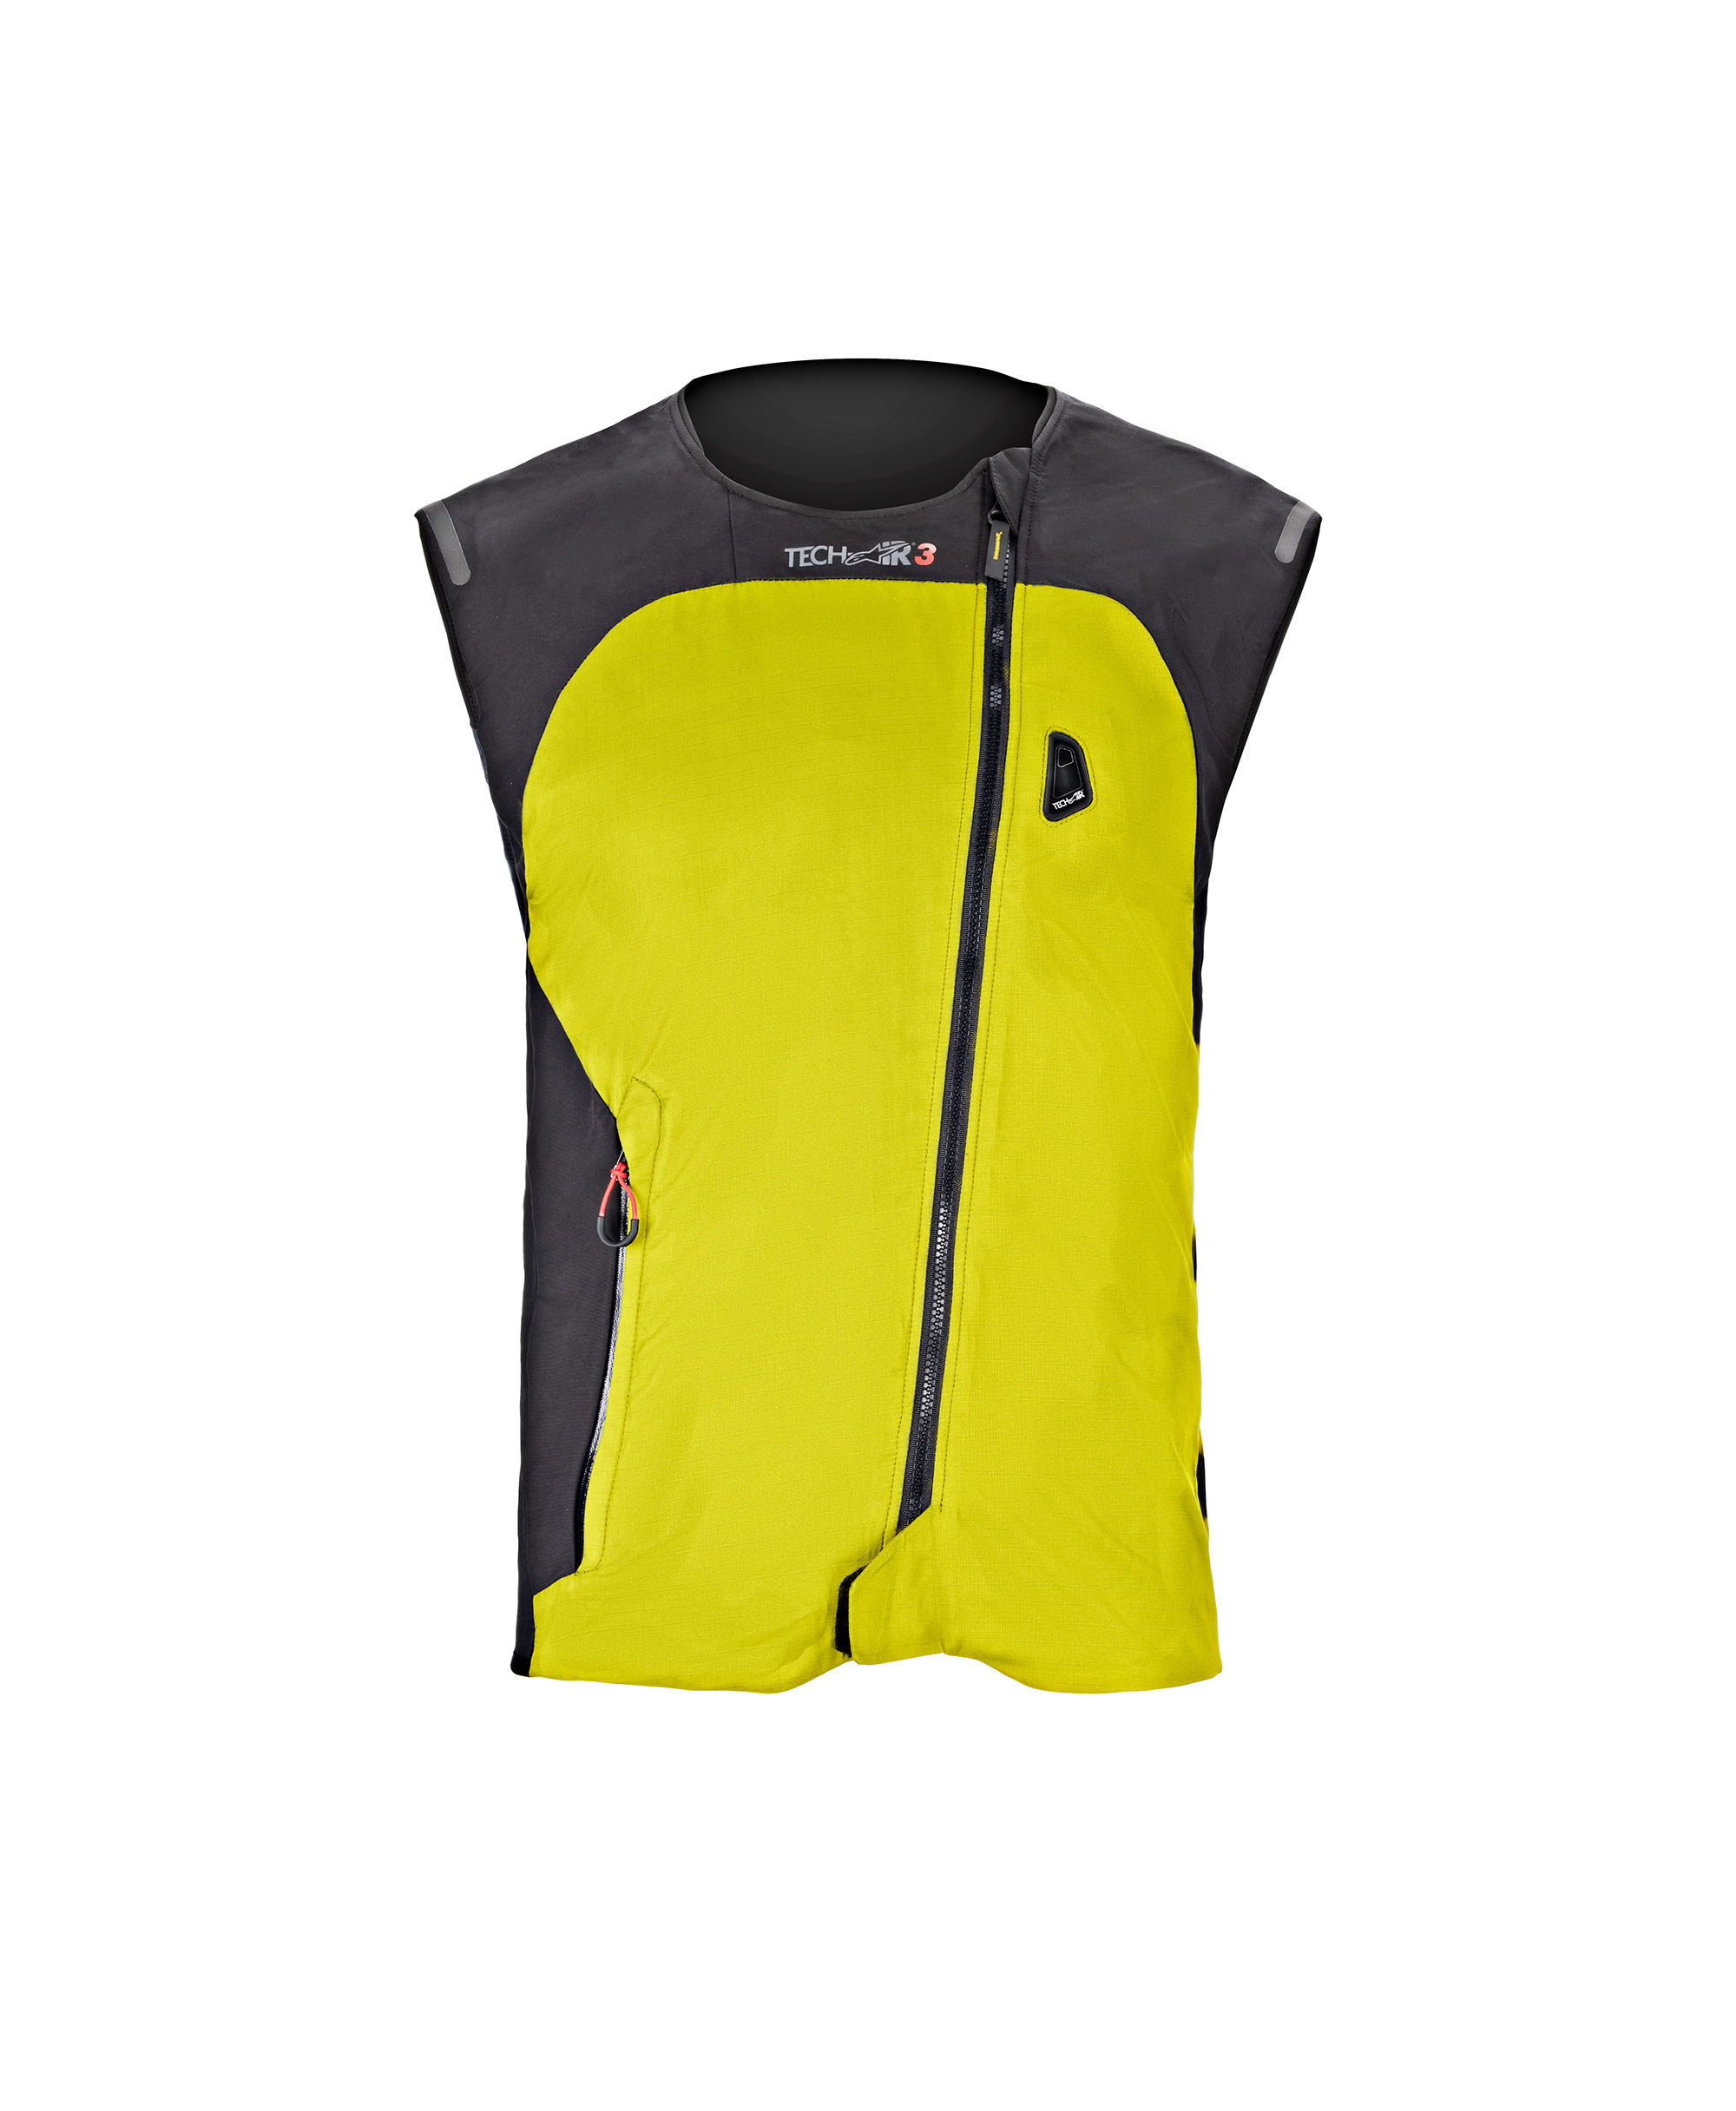 TECH-AIR 3 SYSTEM BLACK YELLOW FLUO